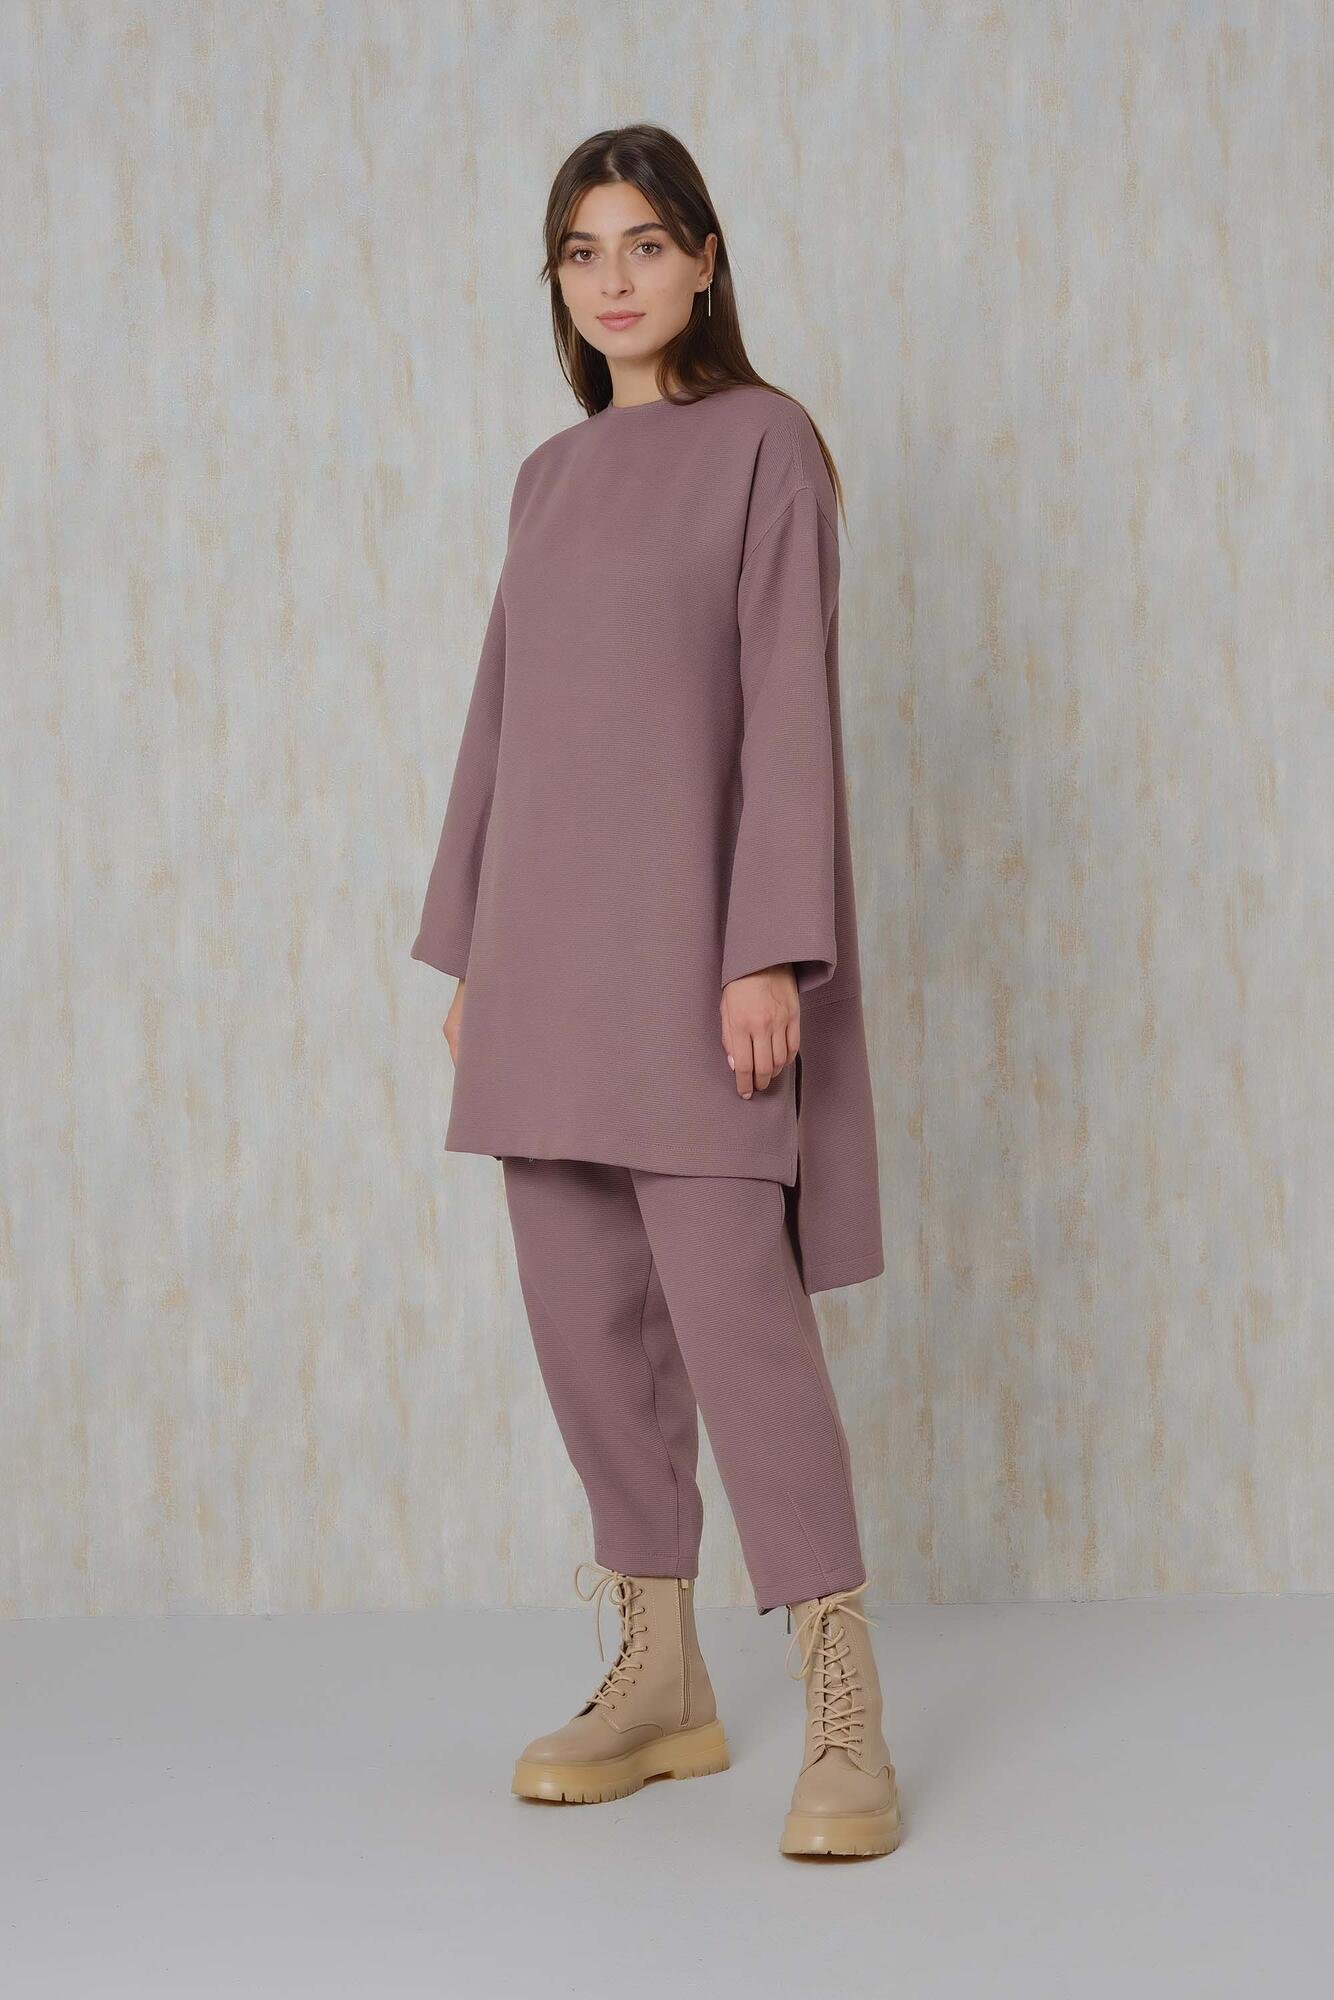 Textured Basic Outfit Purple